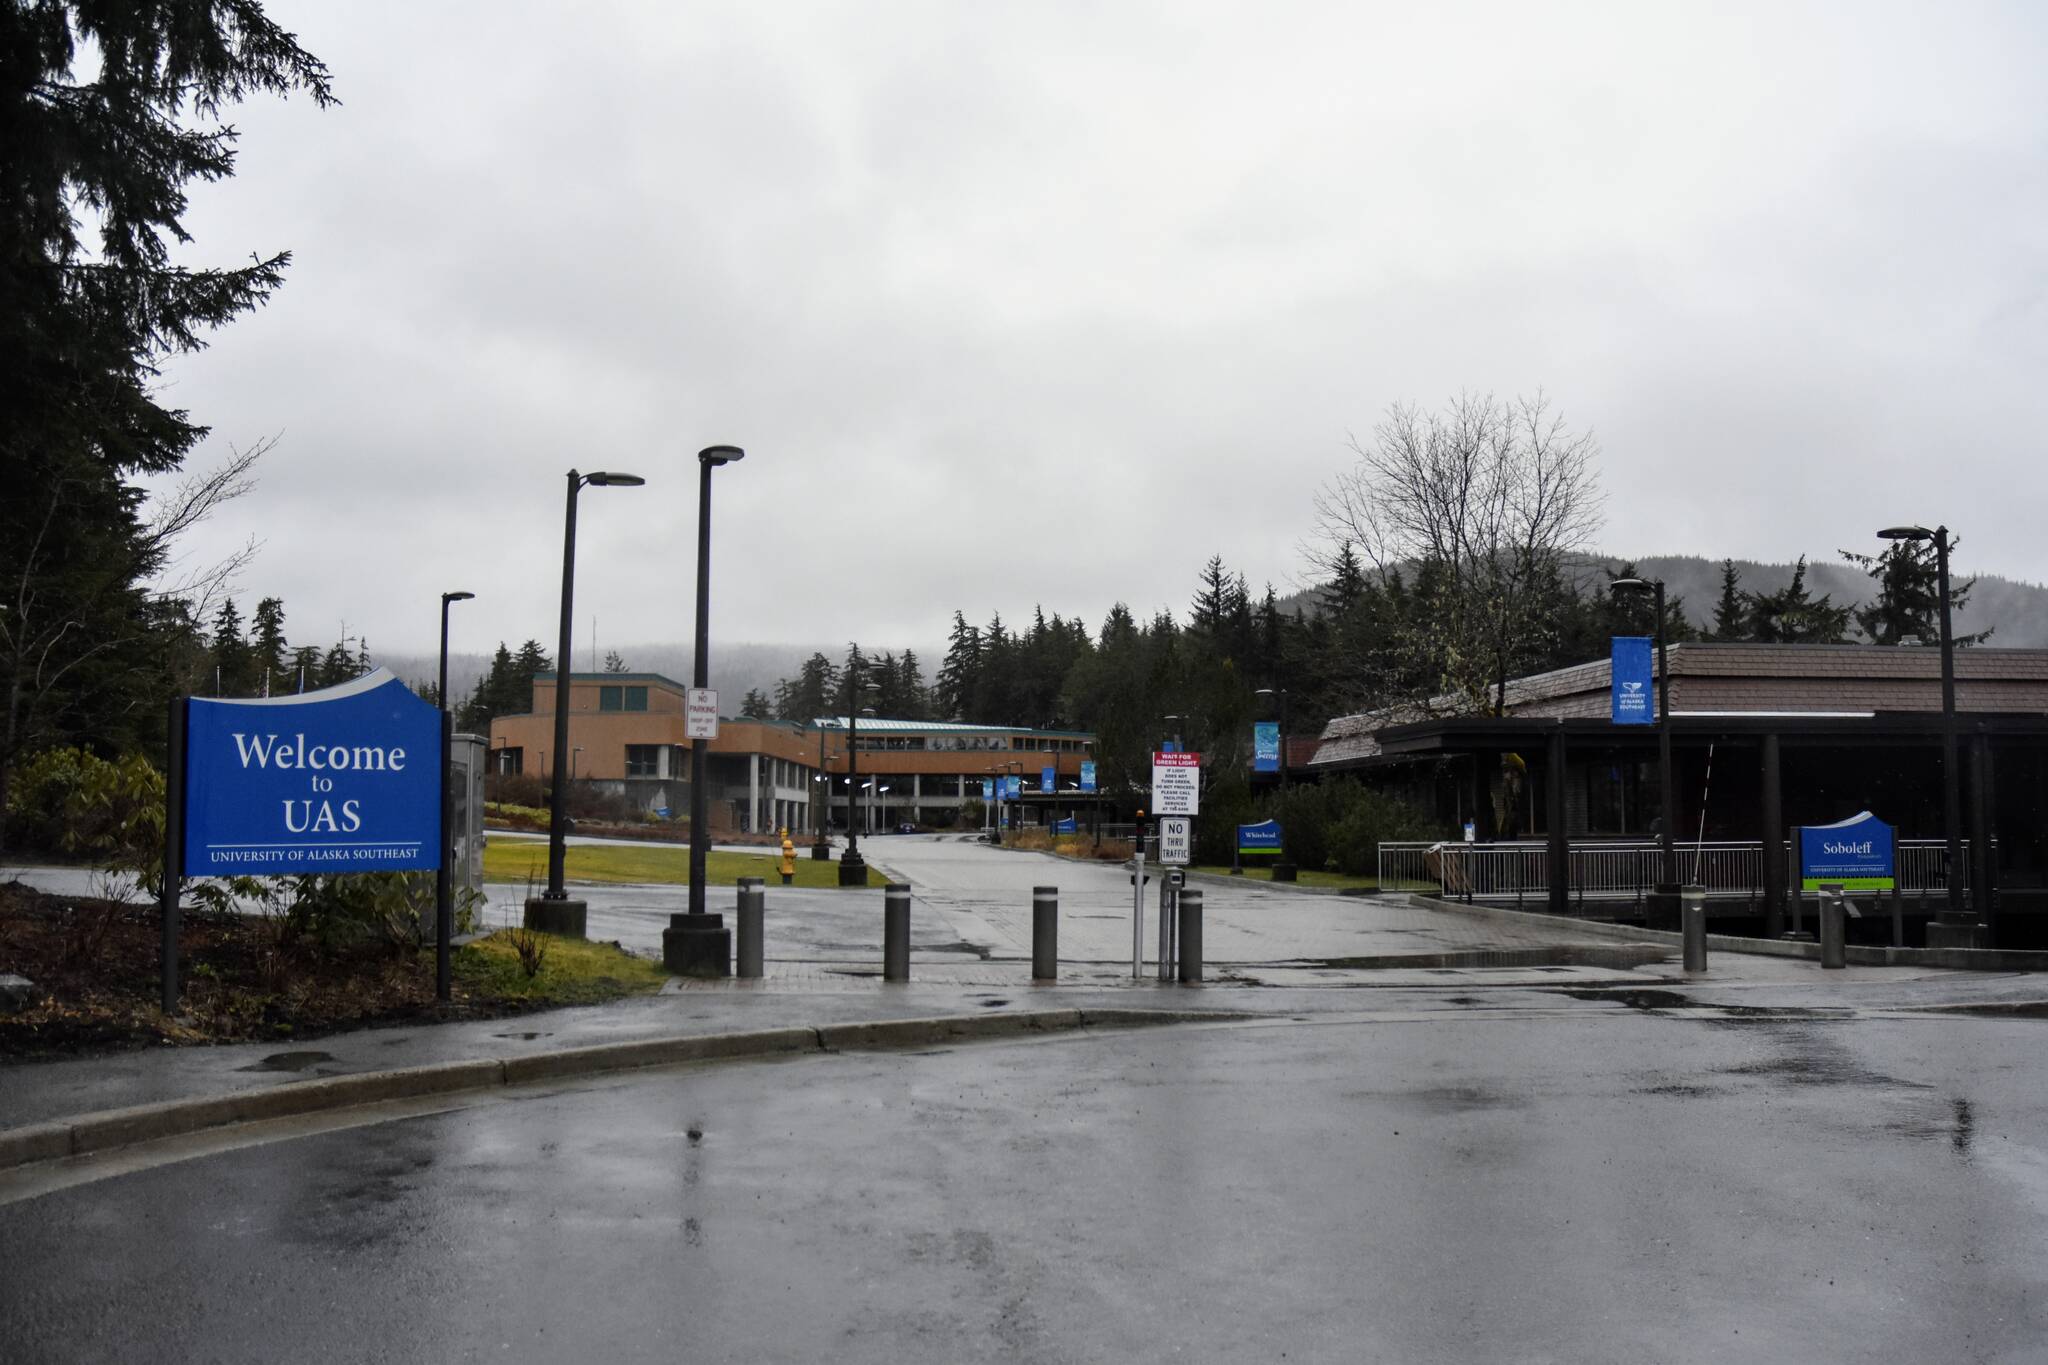 Peter Segall / Juneau Empire
The University of Alaska and the union representing full-time faculty across the system, including the University of Alaska Southeast have agreed to enter into federal mediation after eight months of contract negotiations have failed.